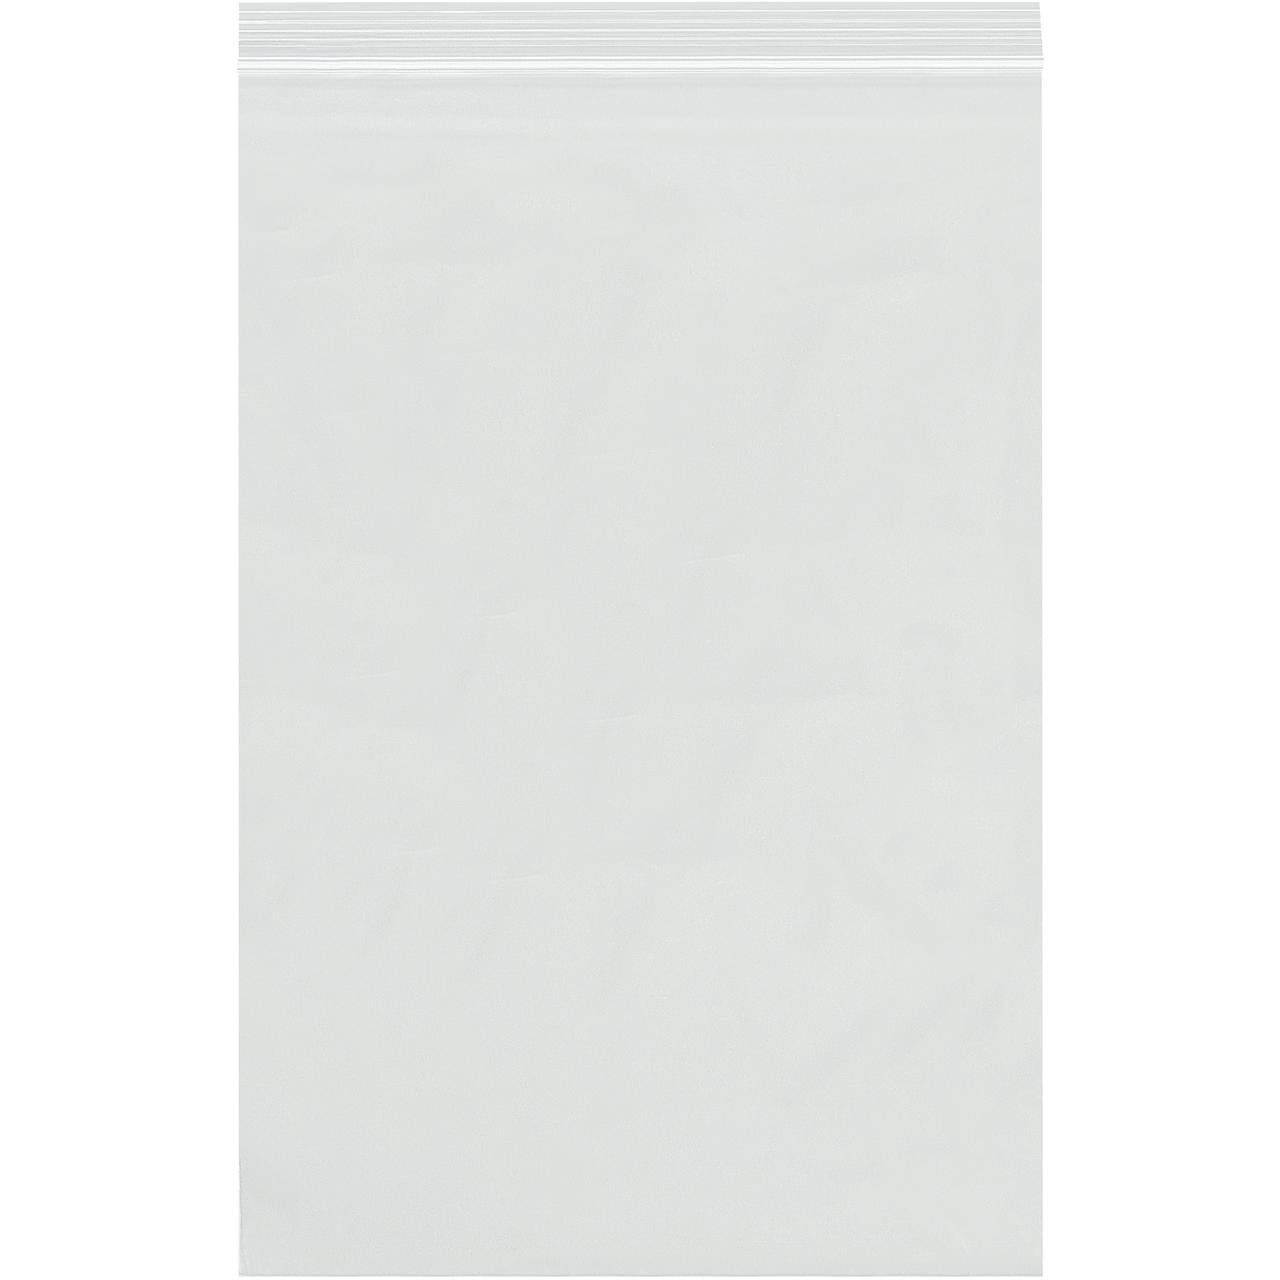 500 pack of 4"x9" Reclosable Resealable Clear Zip Lock Poly Plastic Bags 2 Mil 